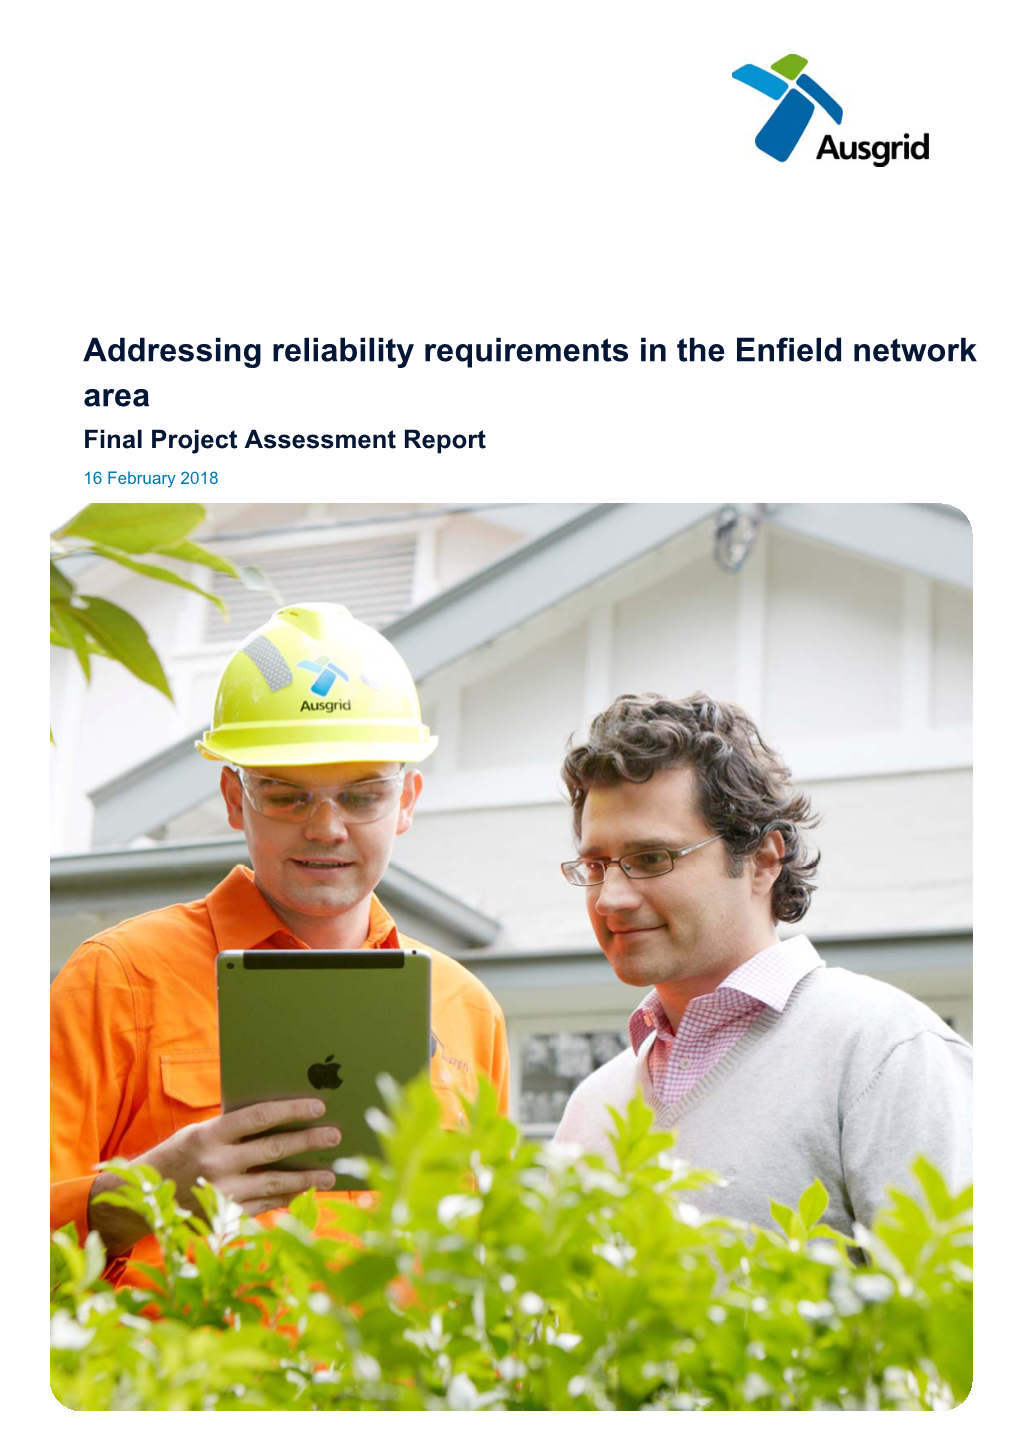 Addressing Reliability Requirements in the Enfield Network Area Final Project Assessment Report 16 February 2018